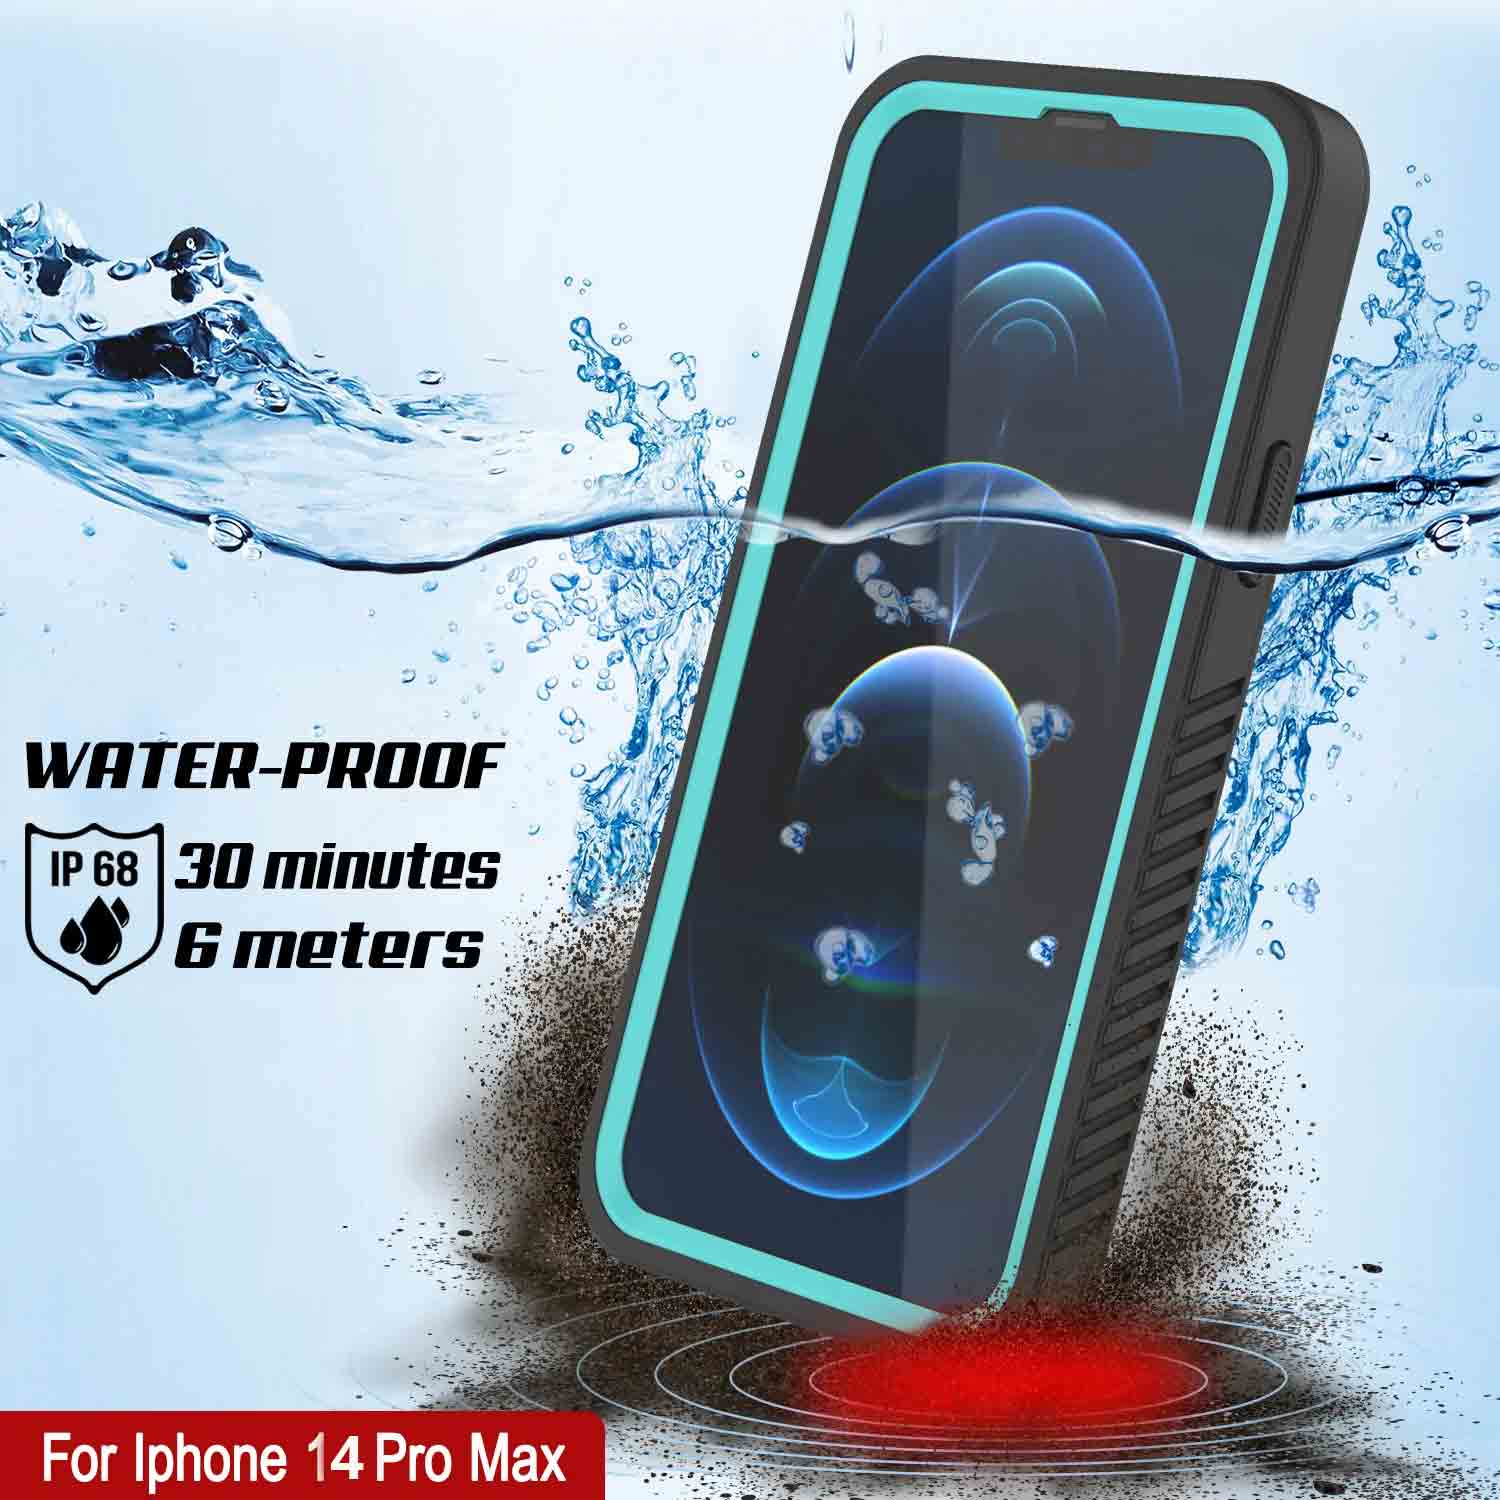 iPhone 14 Pro Max Waterproof Case, Punkcase [Extreme Series] Armor Cover W/ Built In Screen Protector [Teal]